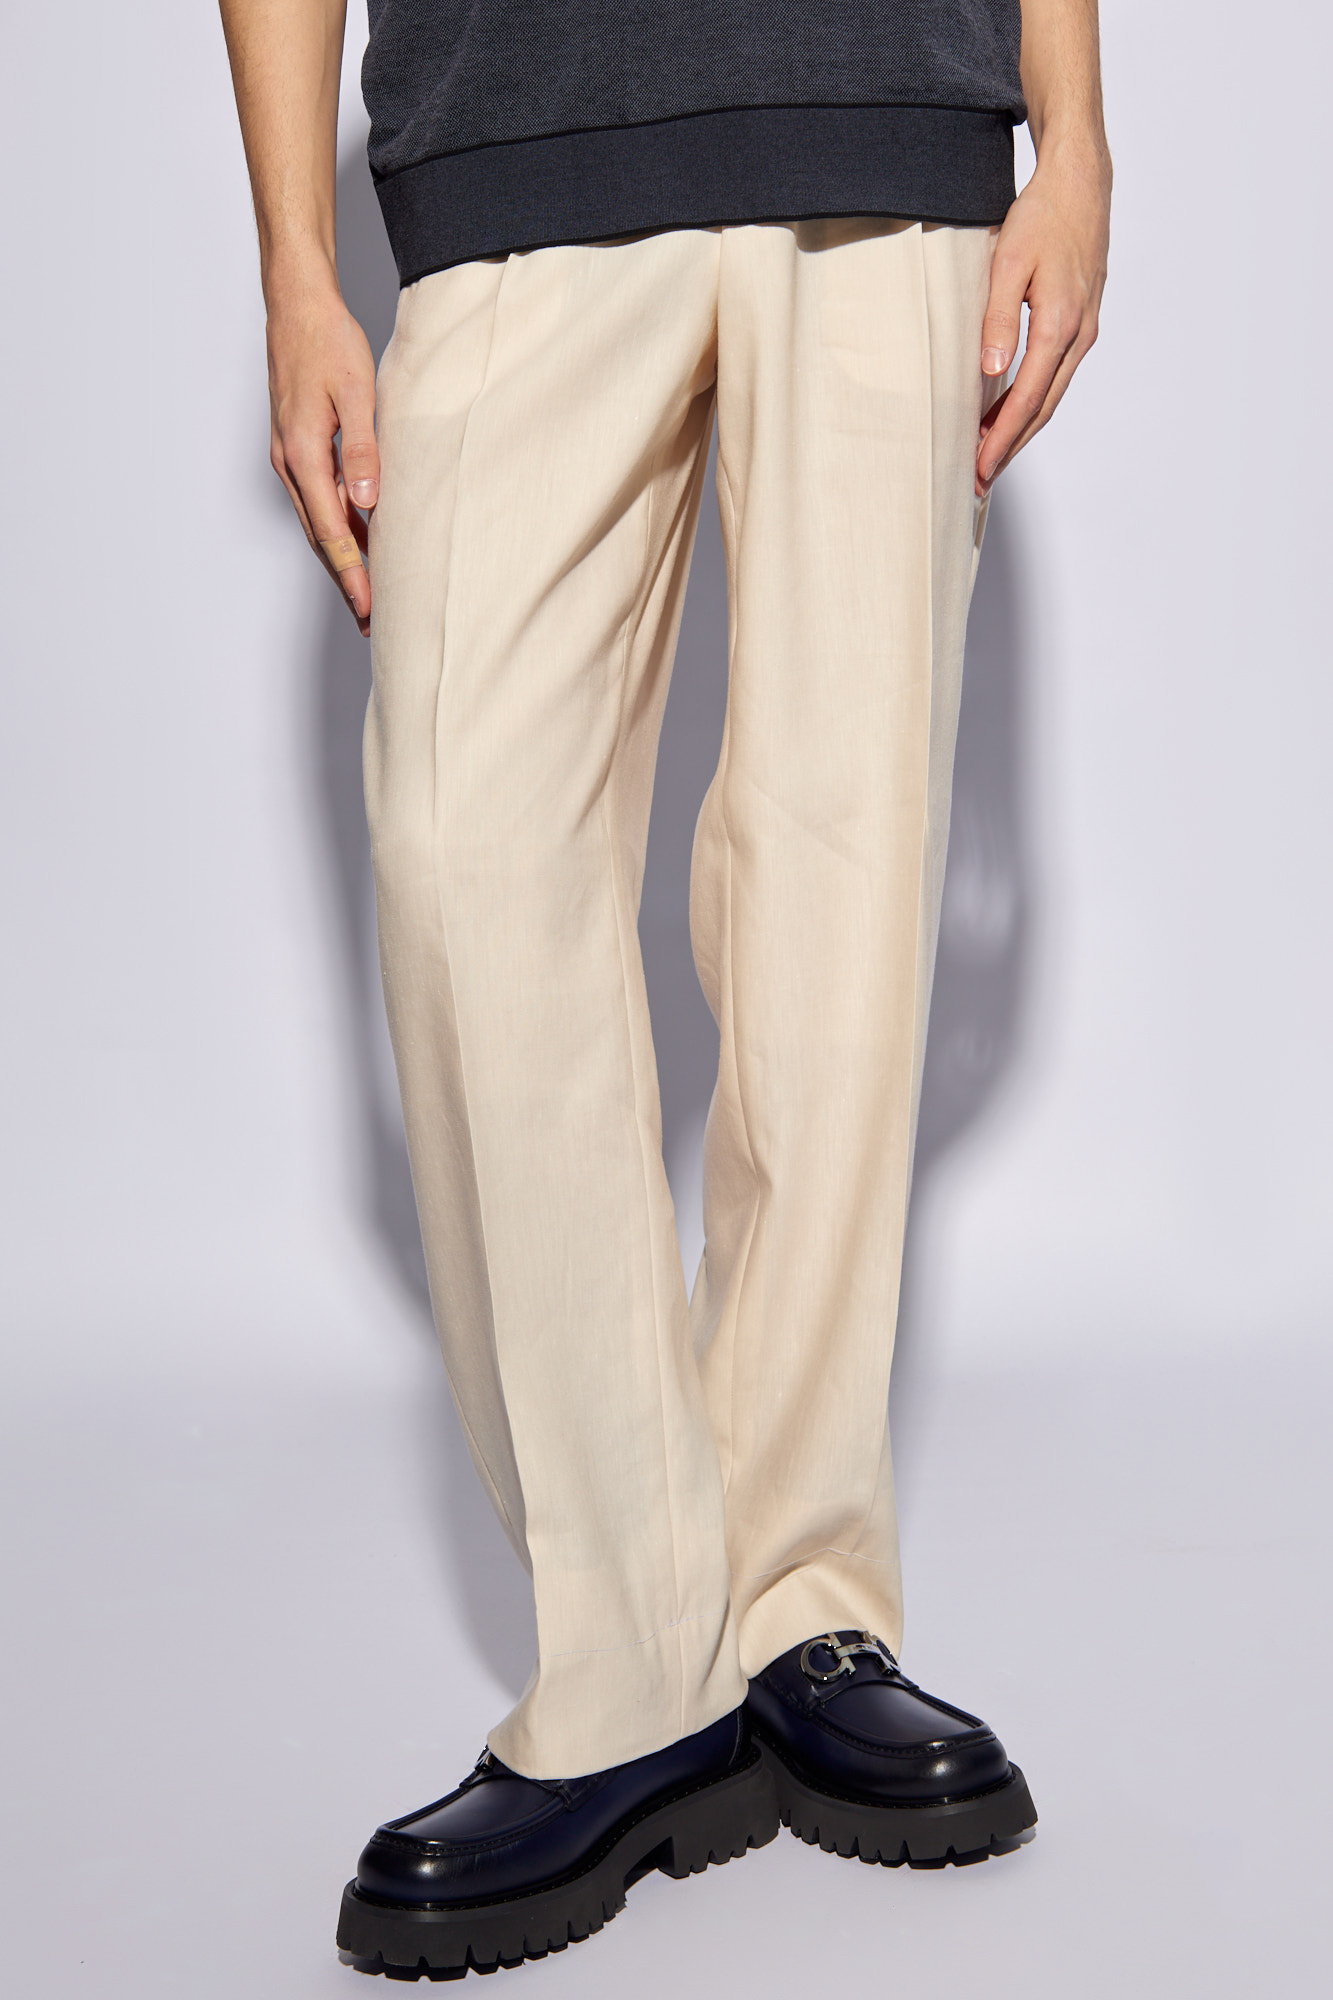 GenesinlifeShops Italy - Geantă VERSACE JEANS COUTURE 72VA4BA6 ZS059 003 -  Cream Pleated trousers Brioni